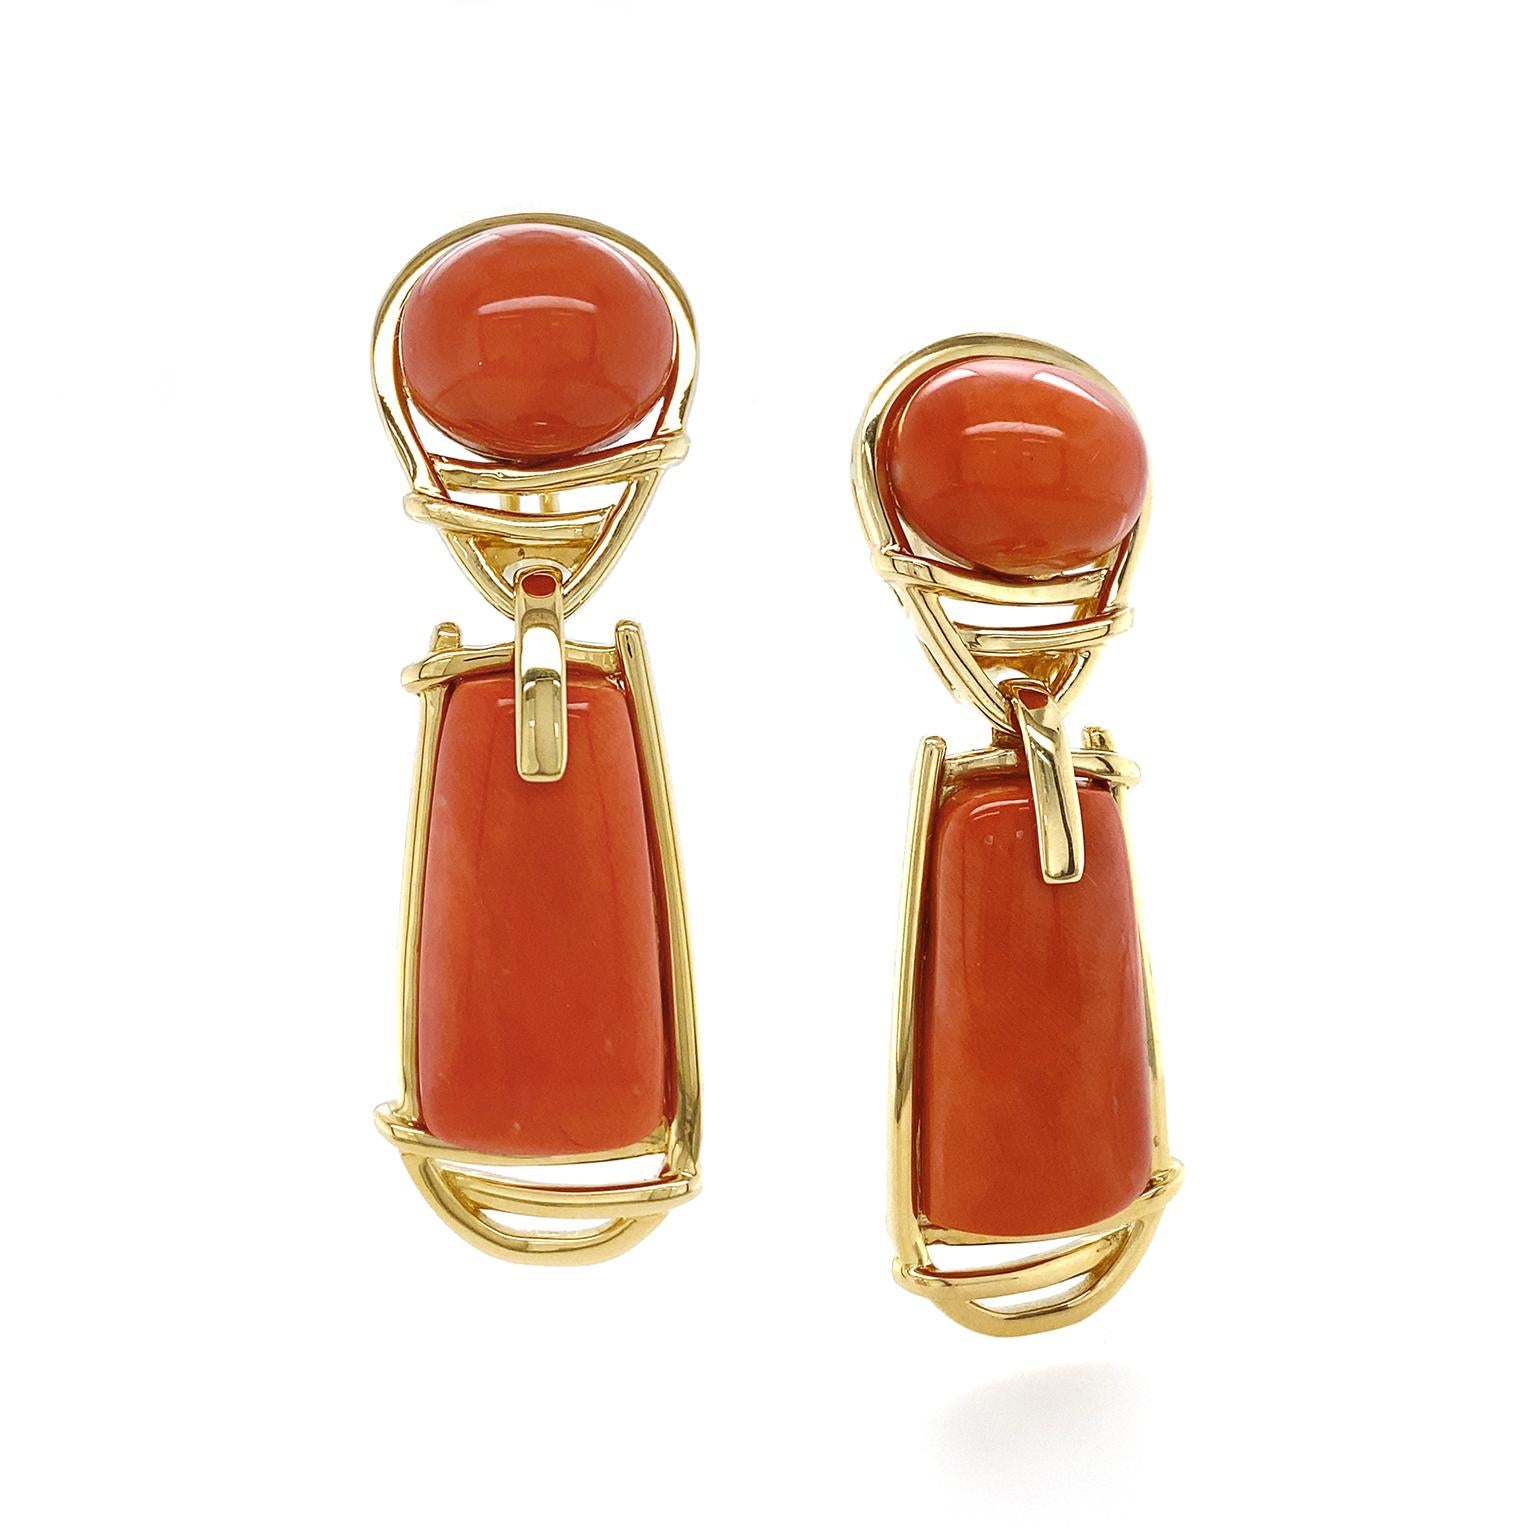 Blazing hue of red corals are emphasized by the equally vibrant 18k yellow gold. An oval cabochon of the gem begins the design, as gold traces around it to form an upturned teardrop. Next a gold link suspends an elongated trapezoid of red coral,